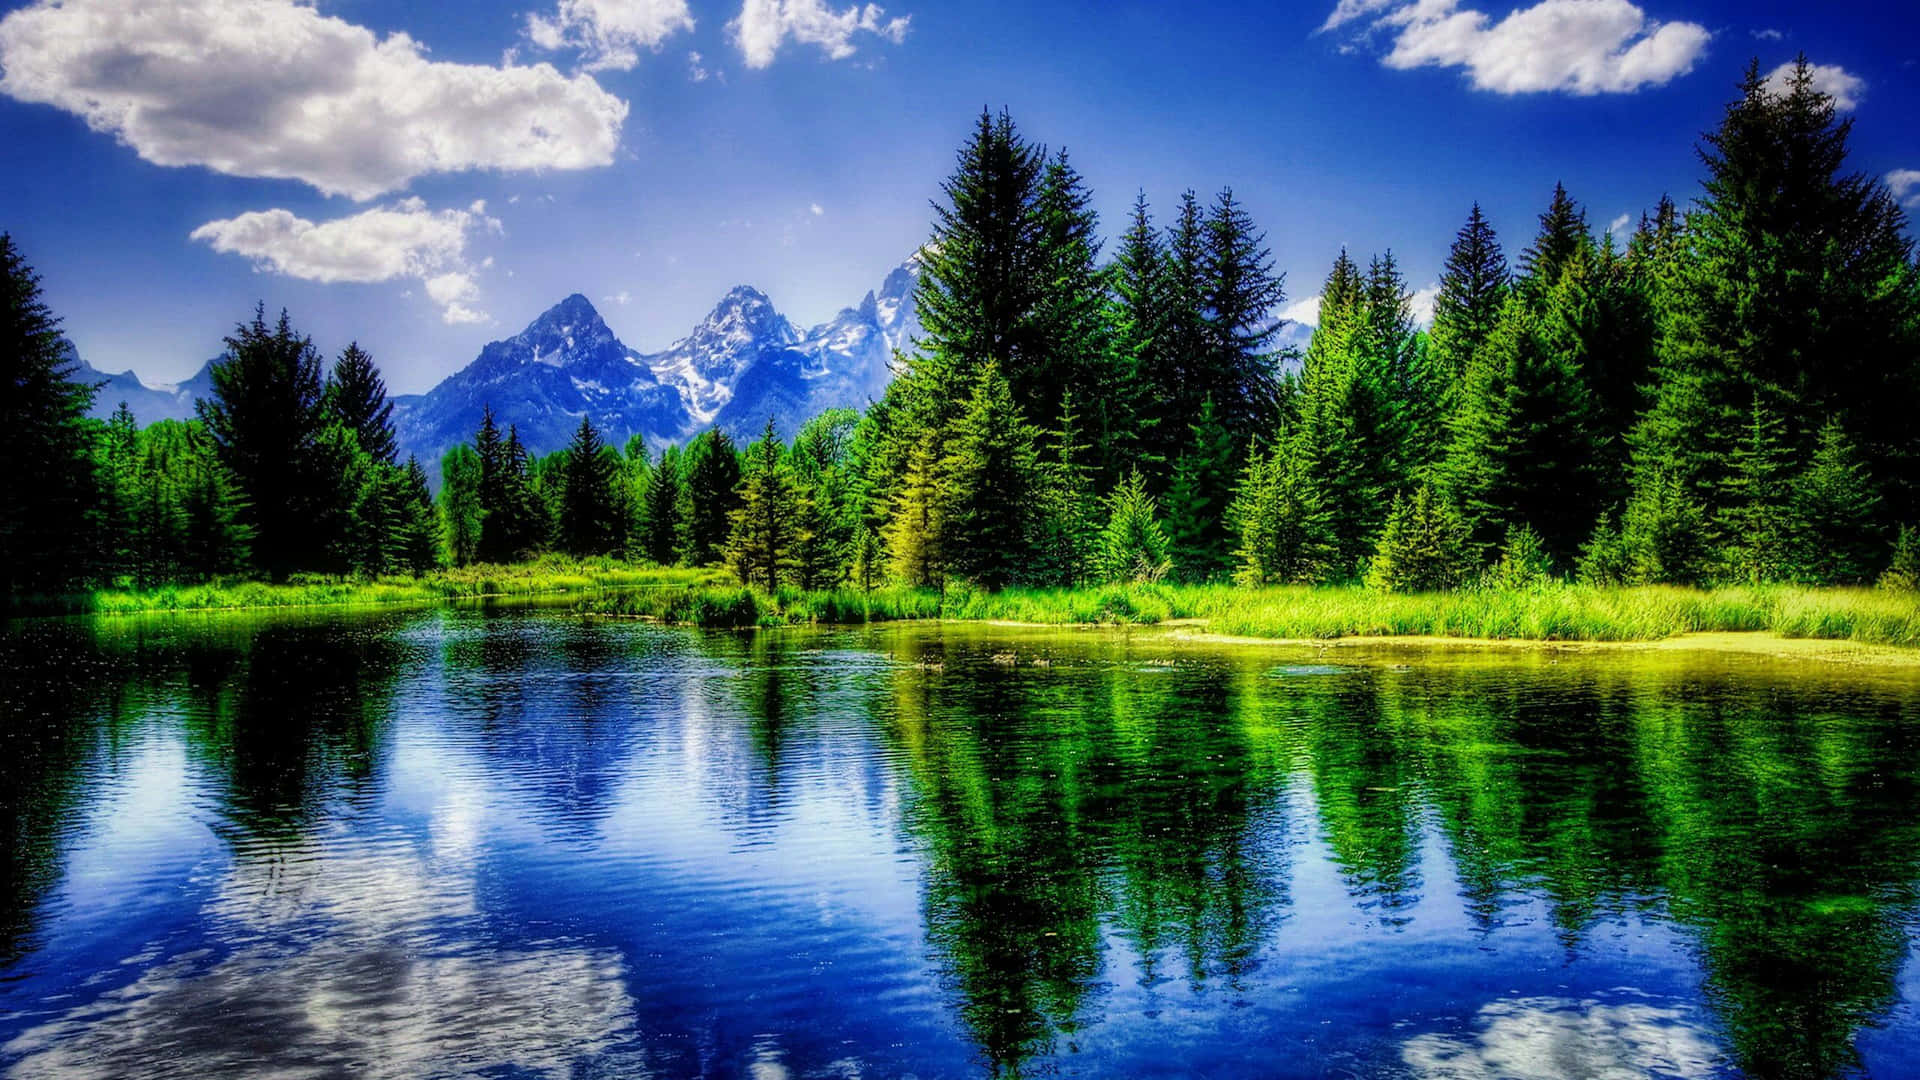 The Todd Lake With Pine Trees Landscape Wallpaper